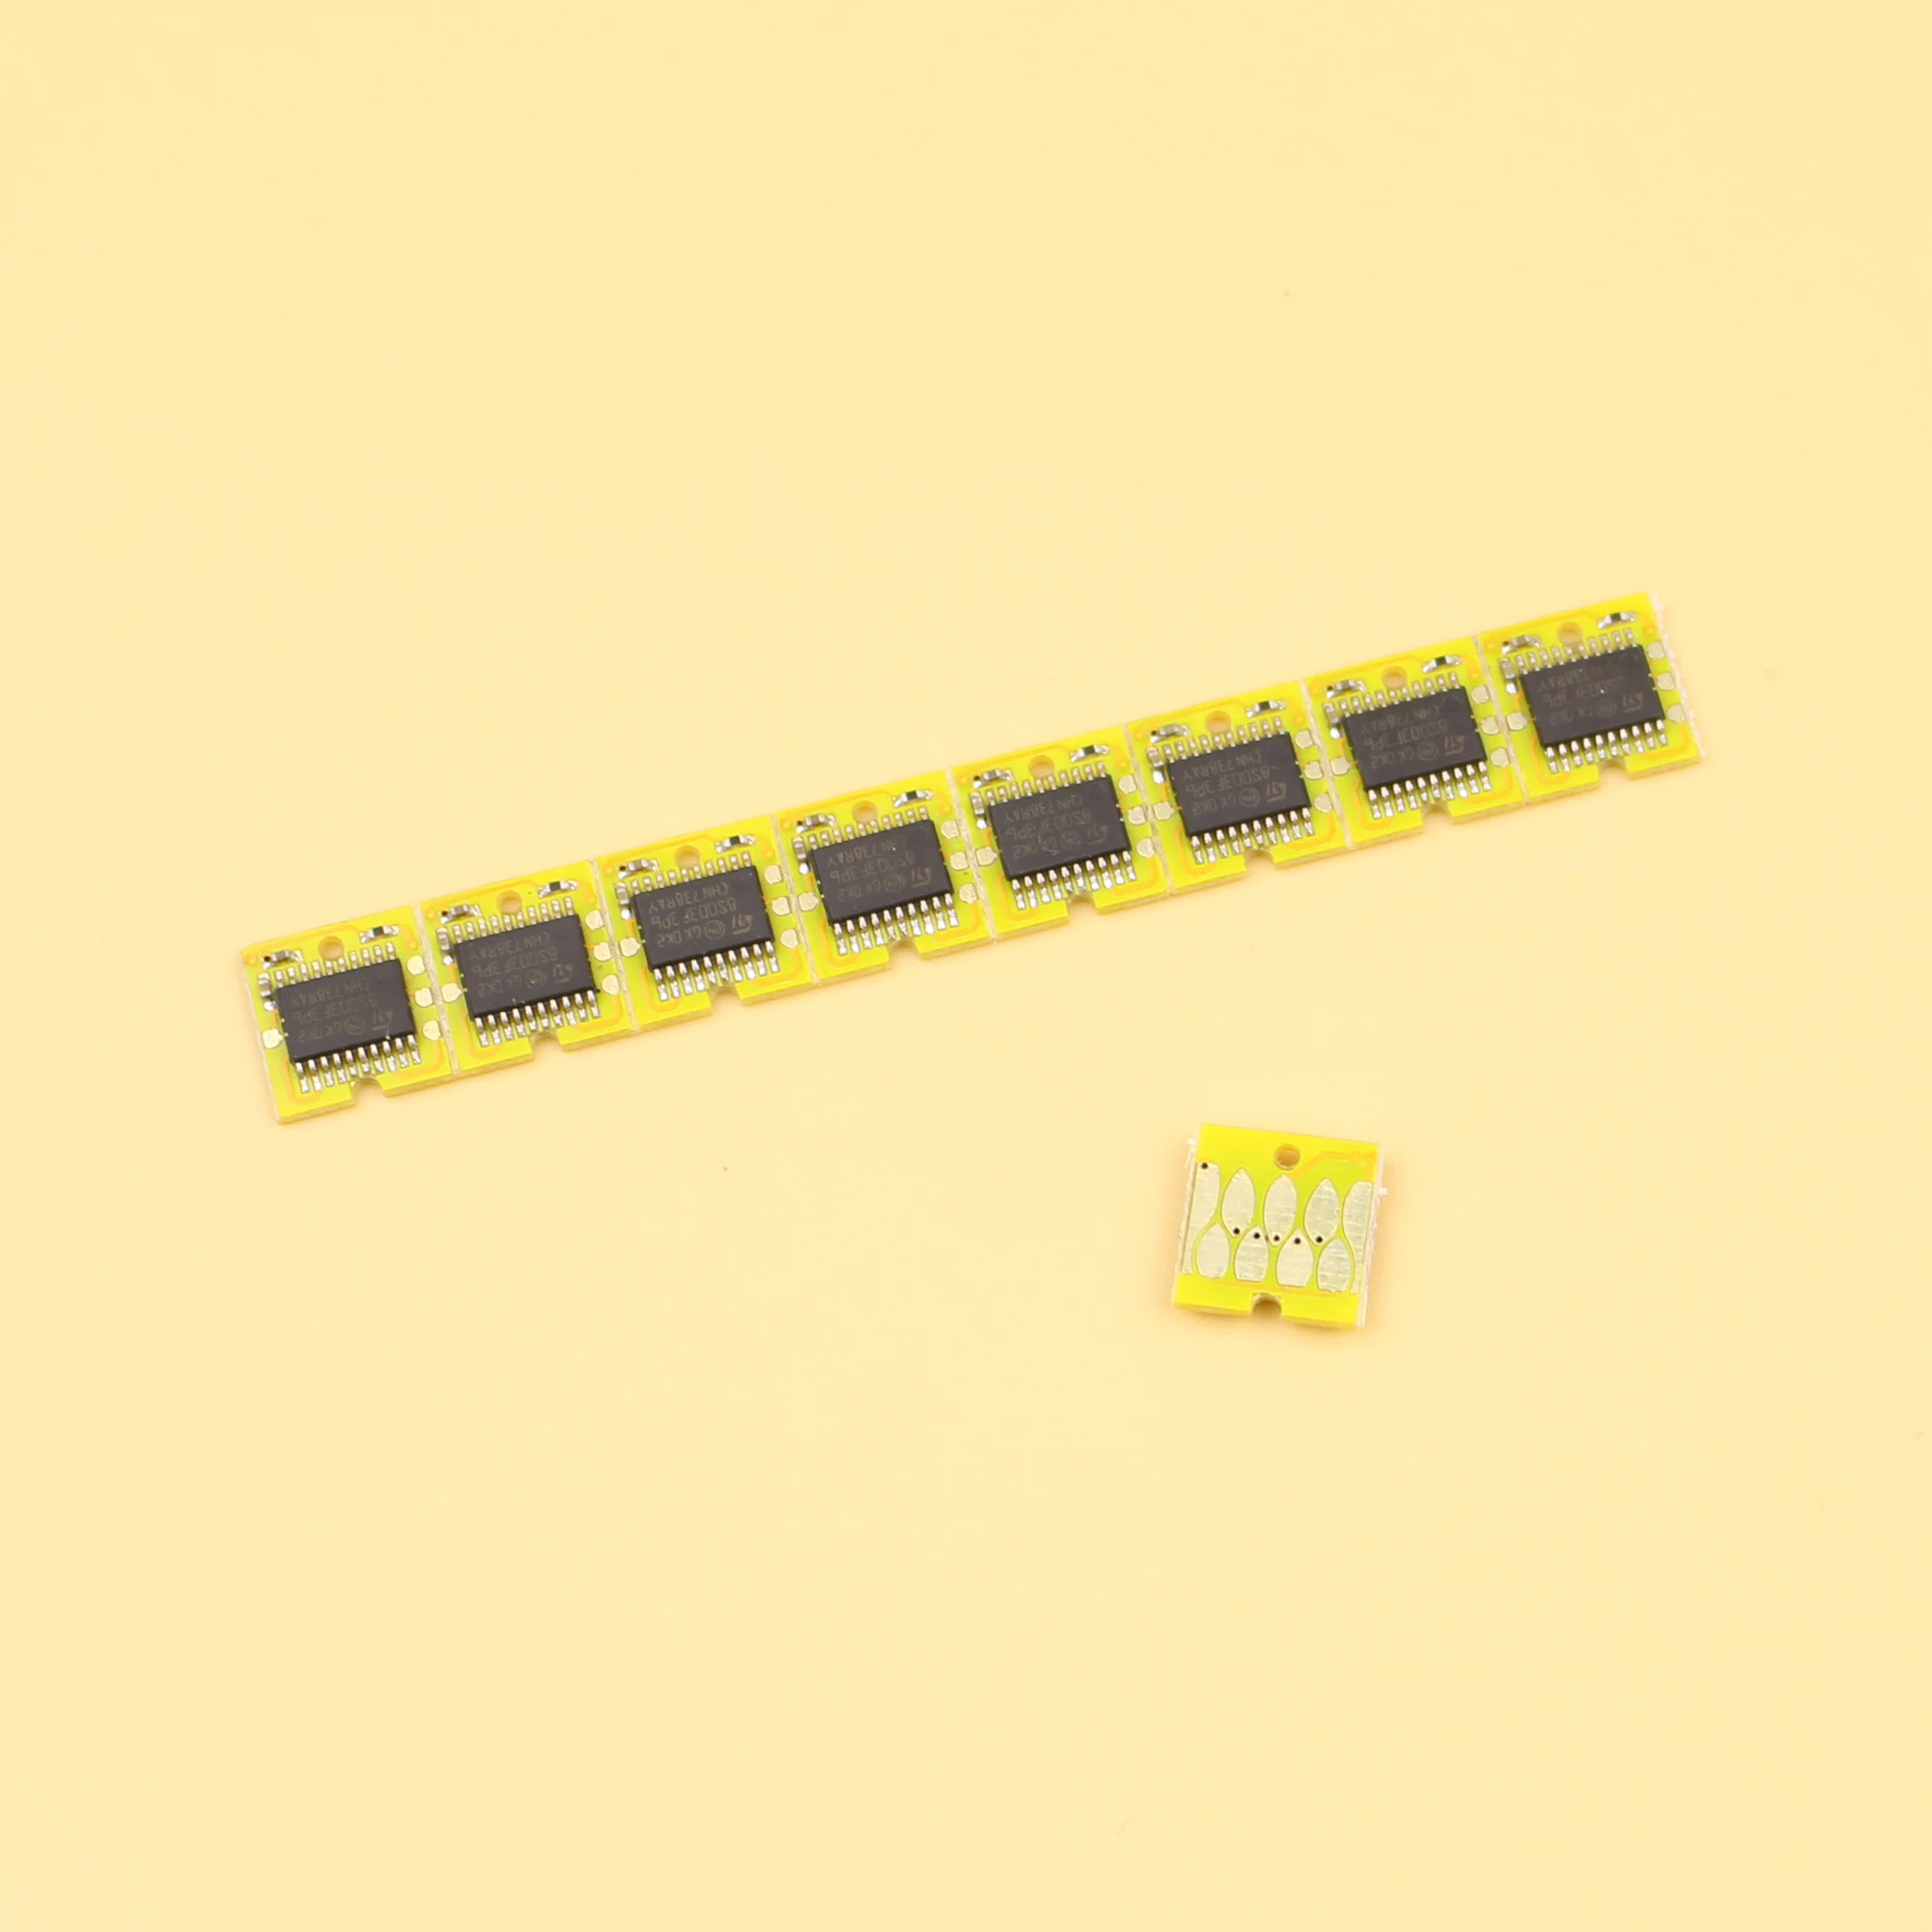 
T6193 Maintenance Tank /Waste ink ARC chips for Epson T3200 T5200 T7200 T3000 T5000 T7000 F6070 